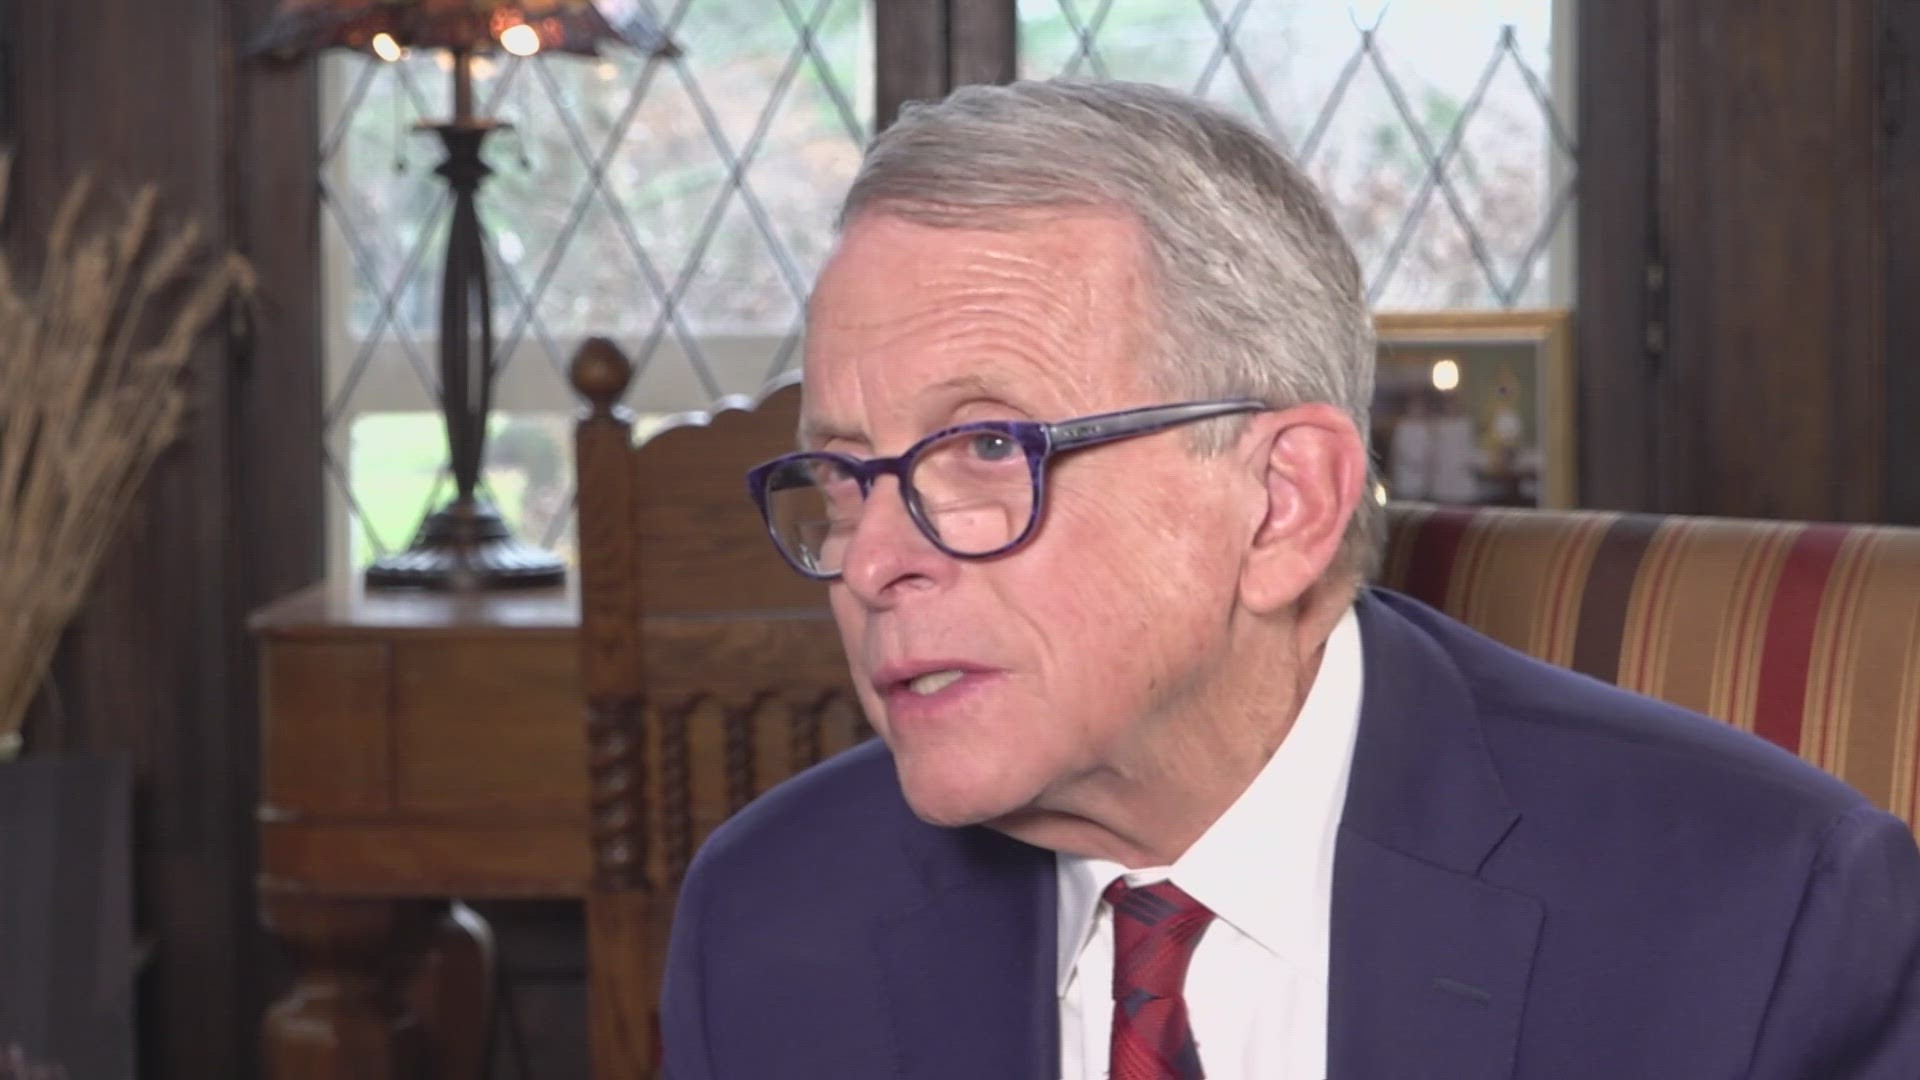 'I think the city is trying to do it,' DeWine said when asked if Cleveland was doing enough.